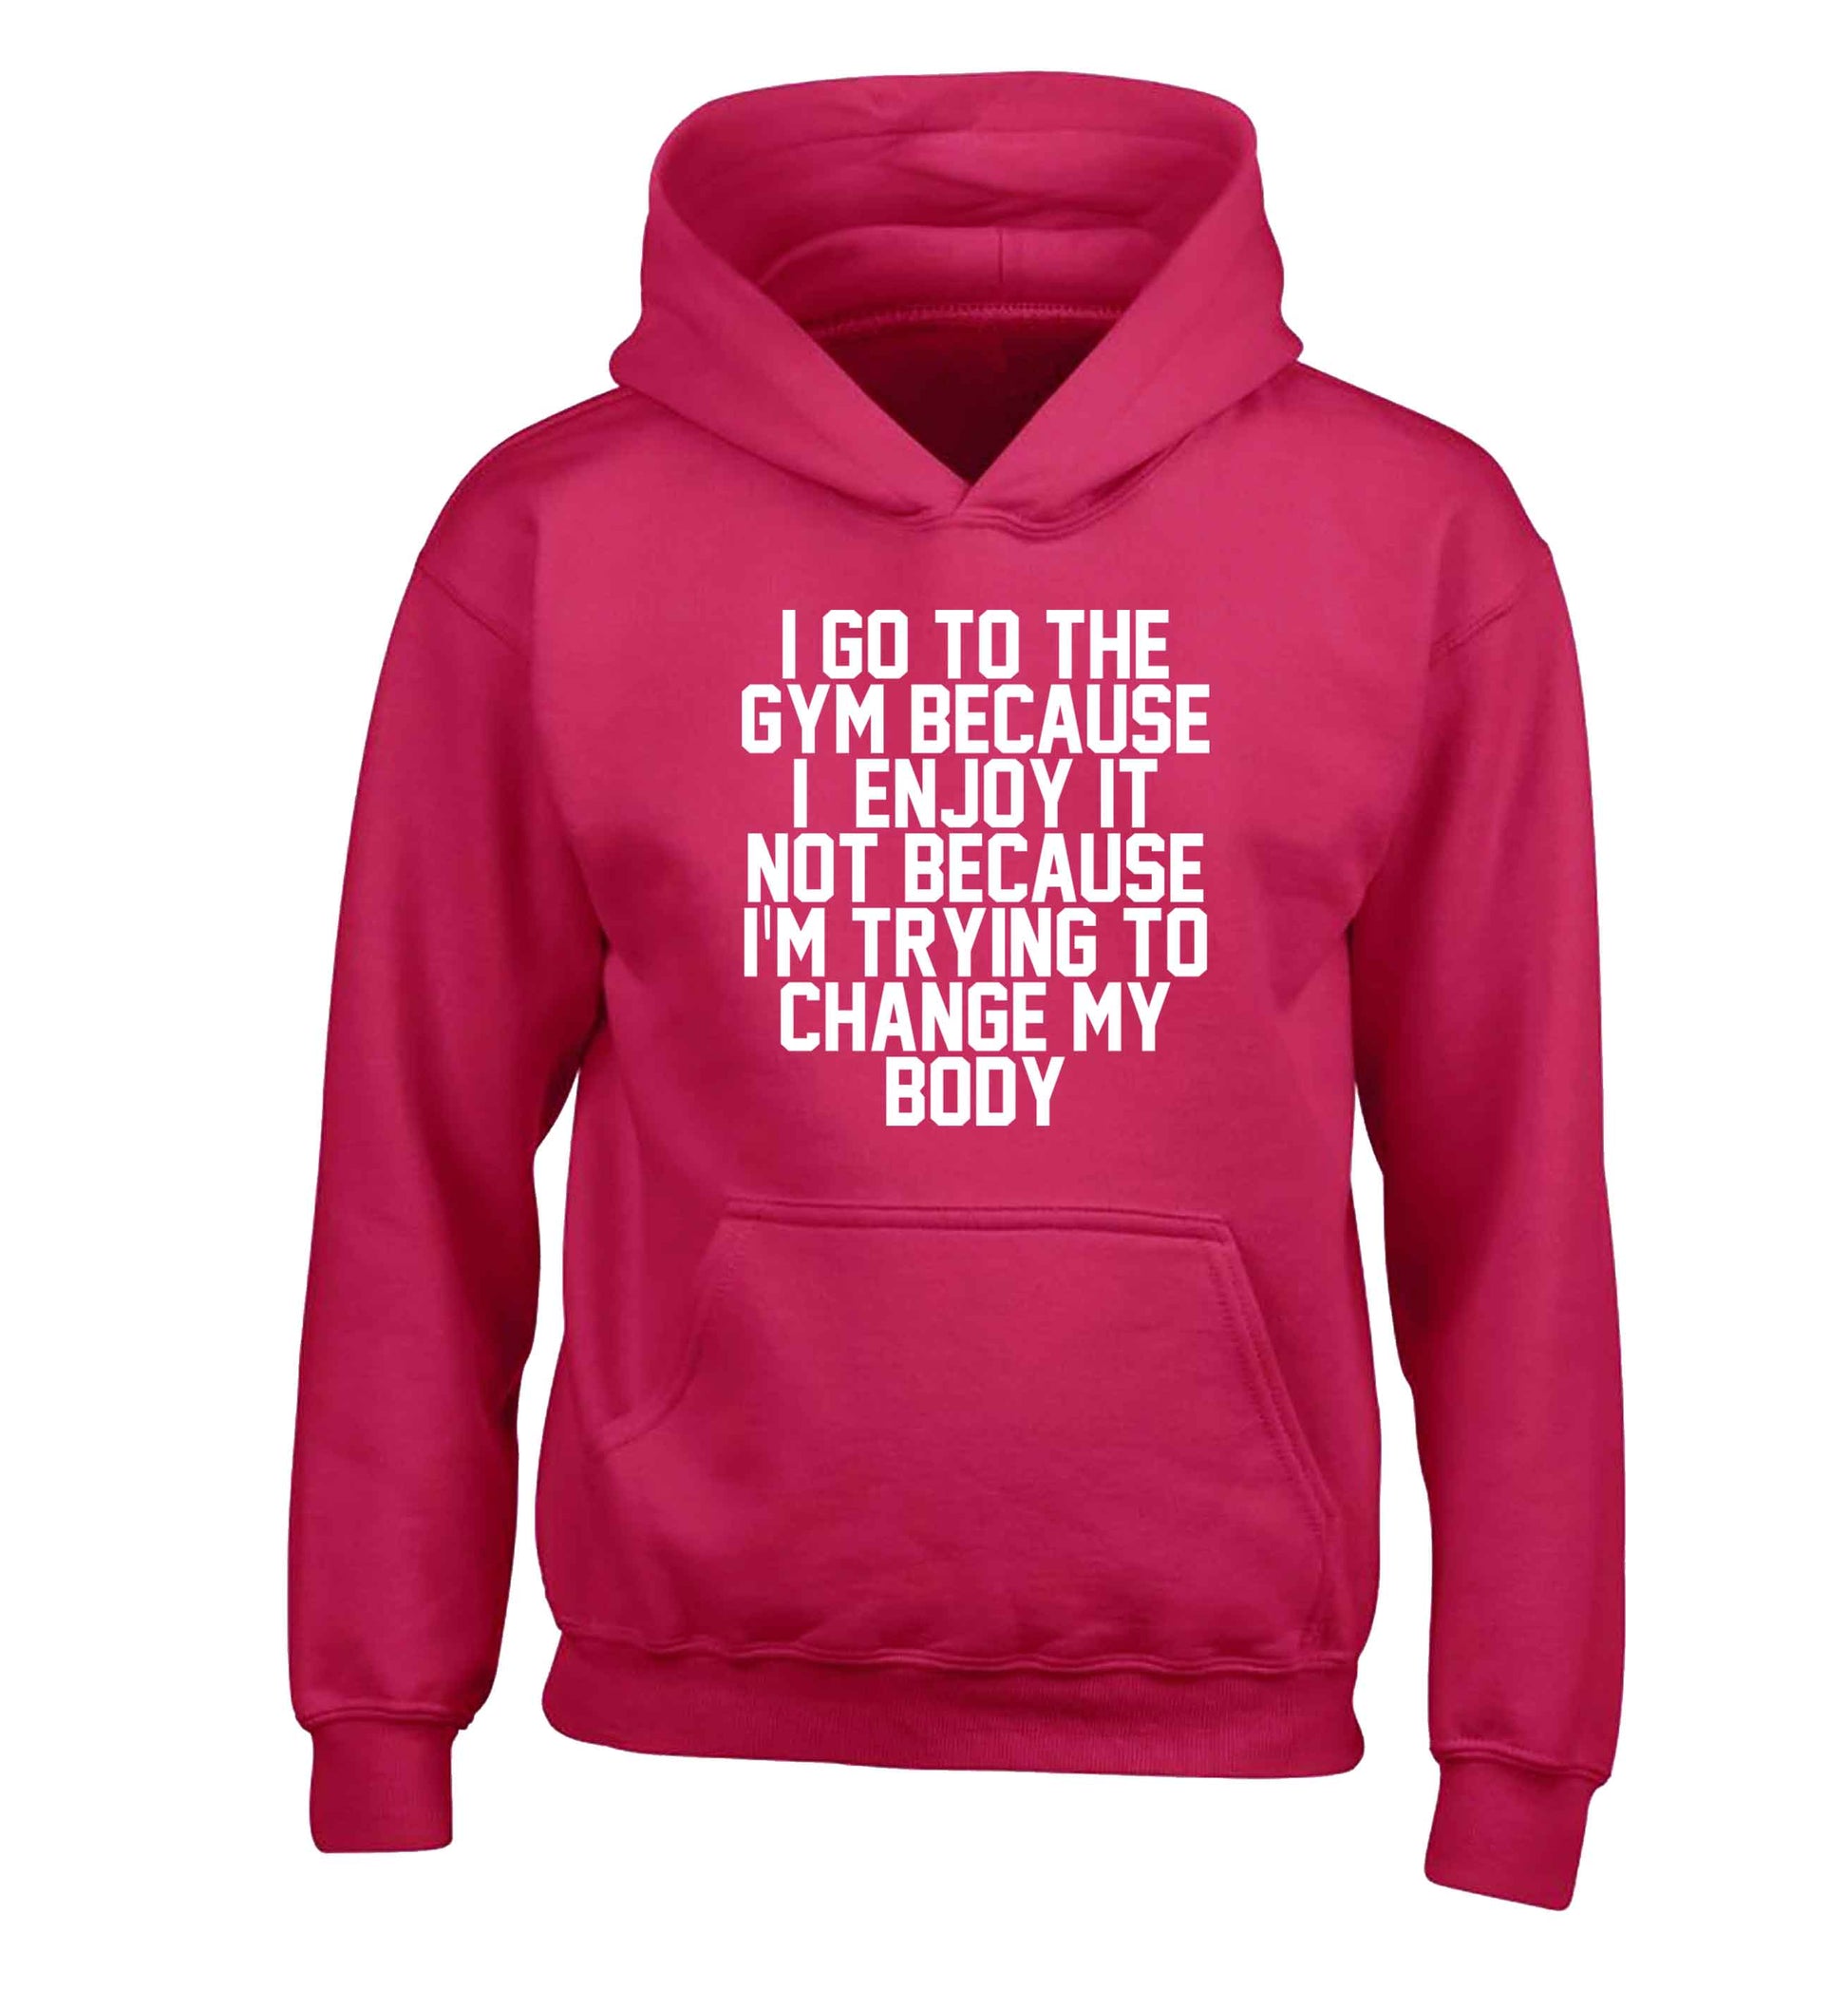 I go to the gym because I enjoy it not because I'm trying to change my body children's pink hoodie 12-13 Years